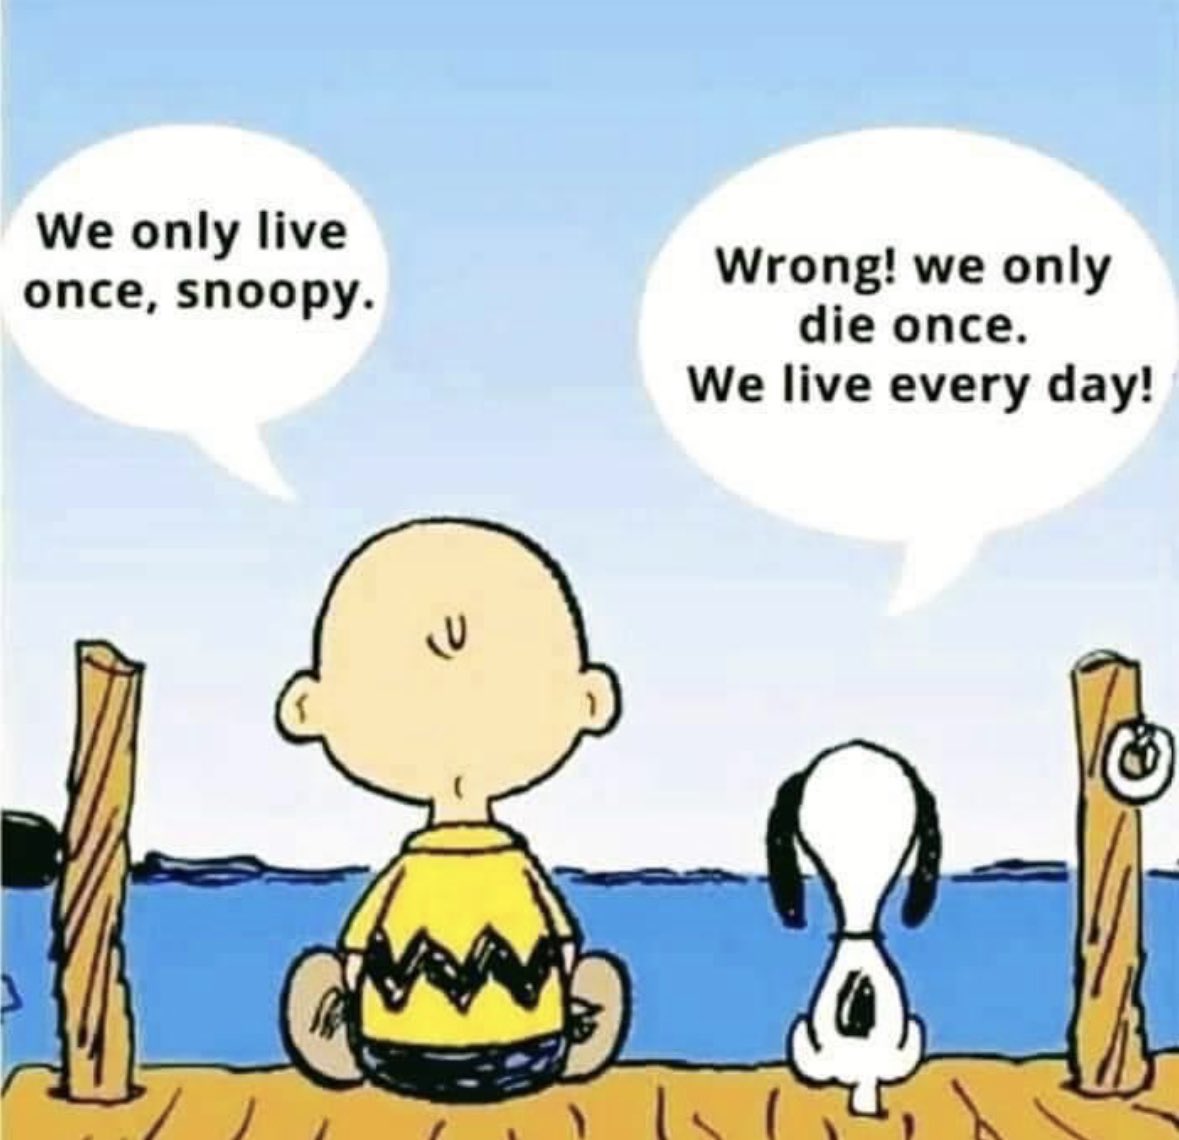 Wise words Snoopy 🧡